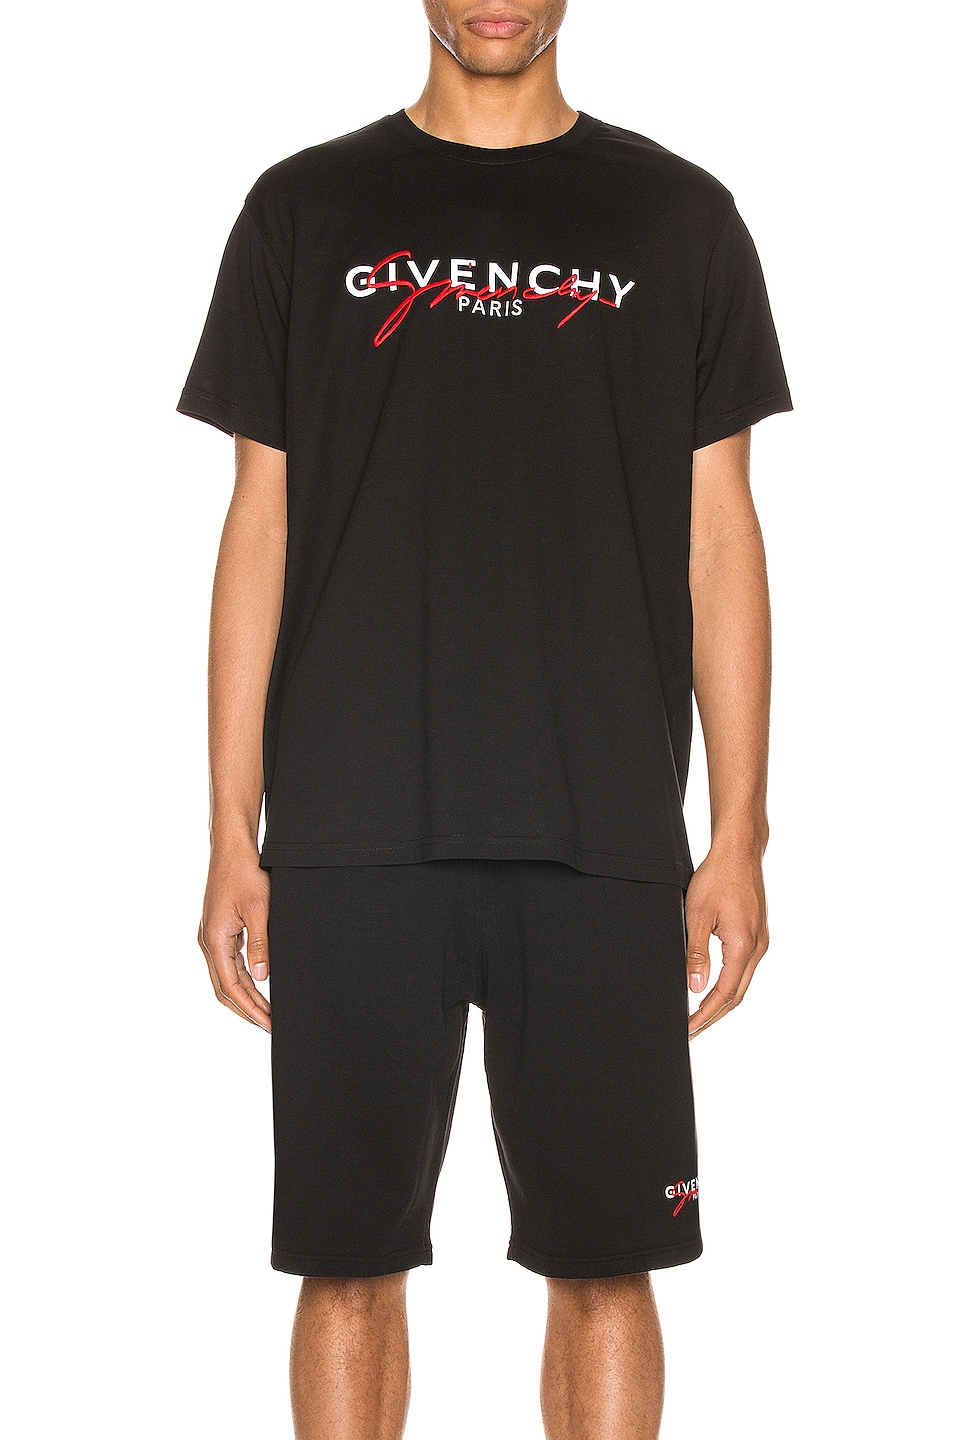 Image 1 of Givenchy Print & Signature Tee in Black & Red